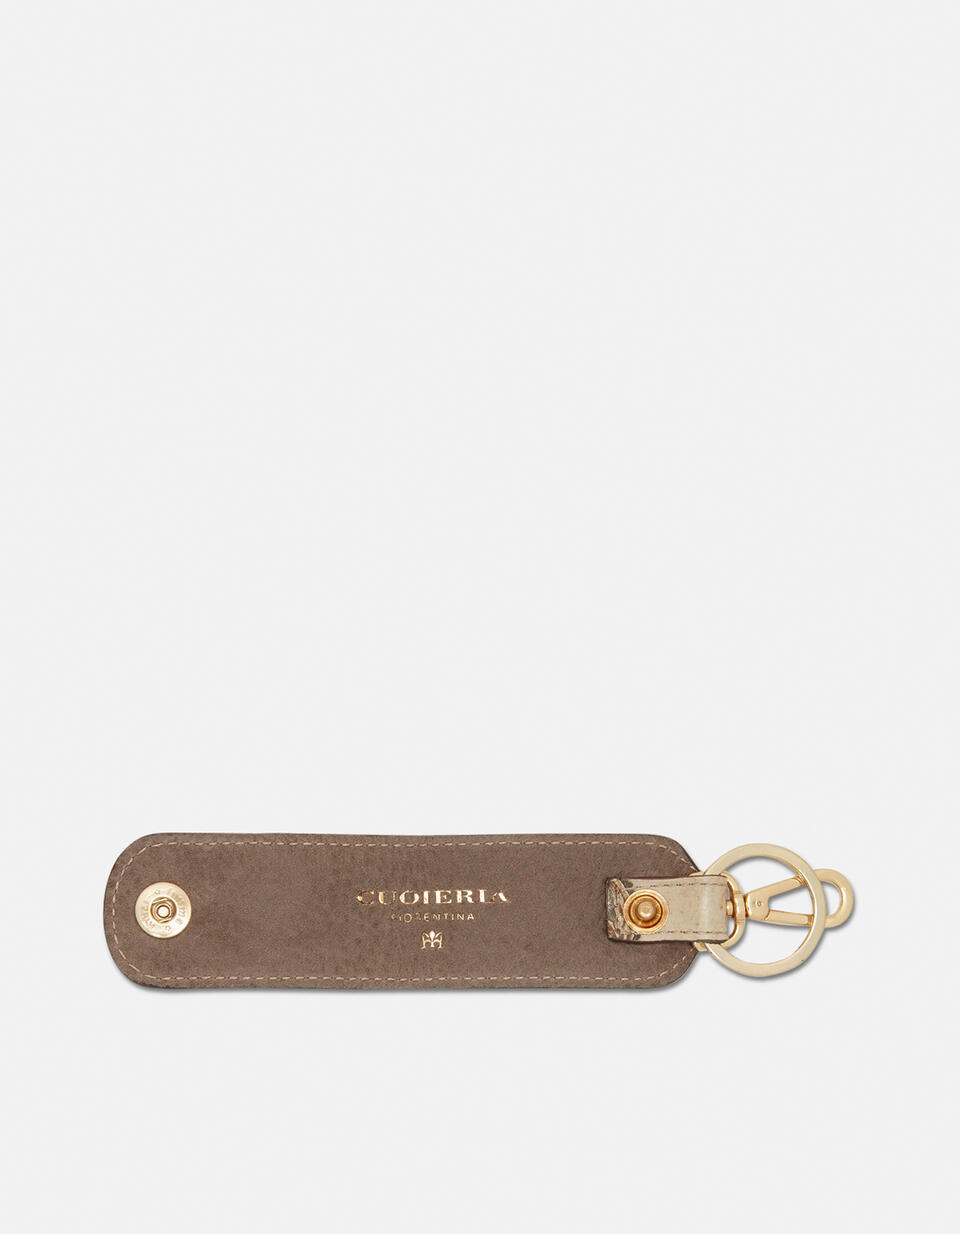 Keyring Taupe  - Key Holders - Women's Accessories - Accessories - Cuoieria Fiorentina